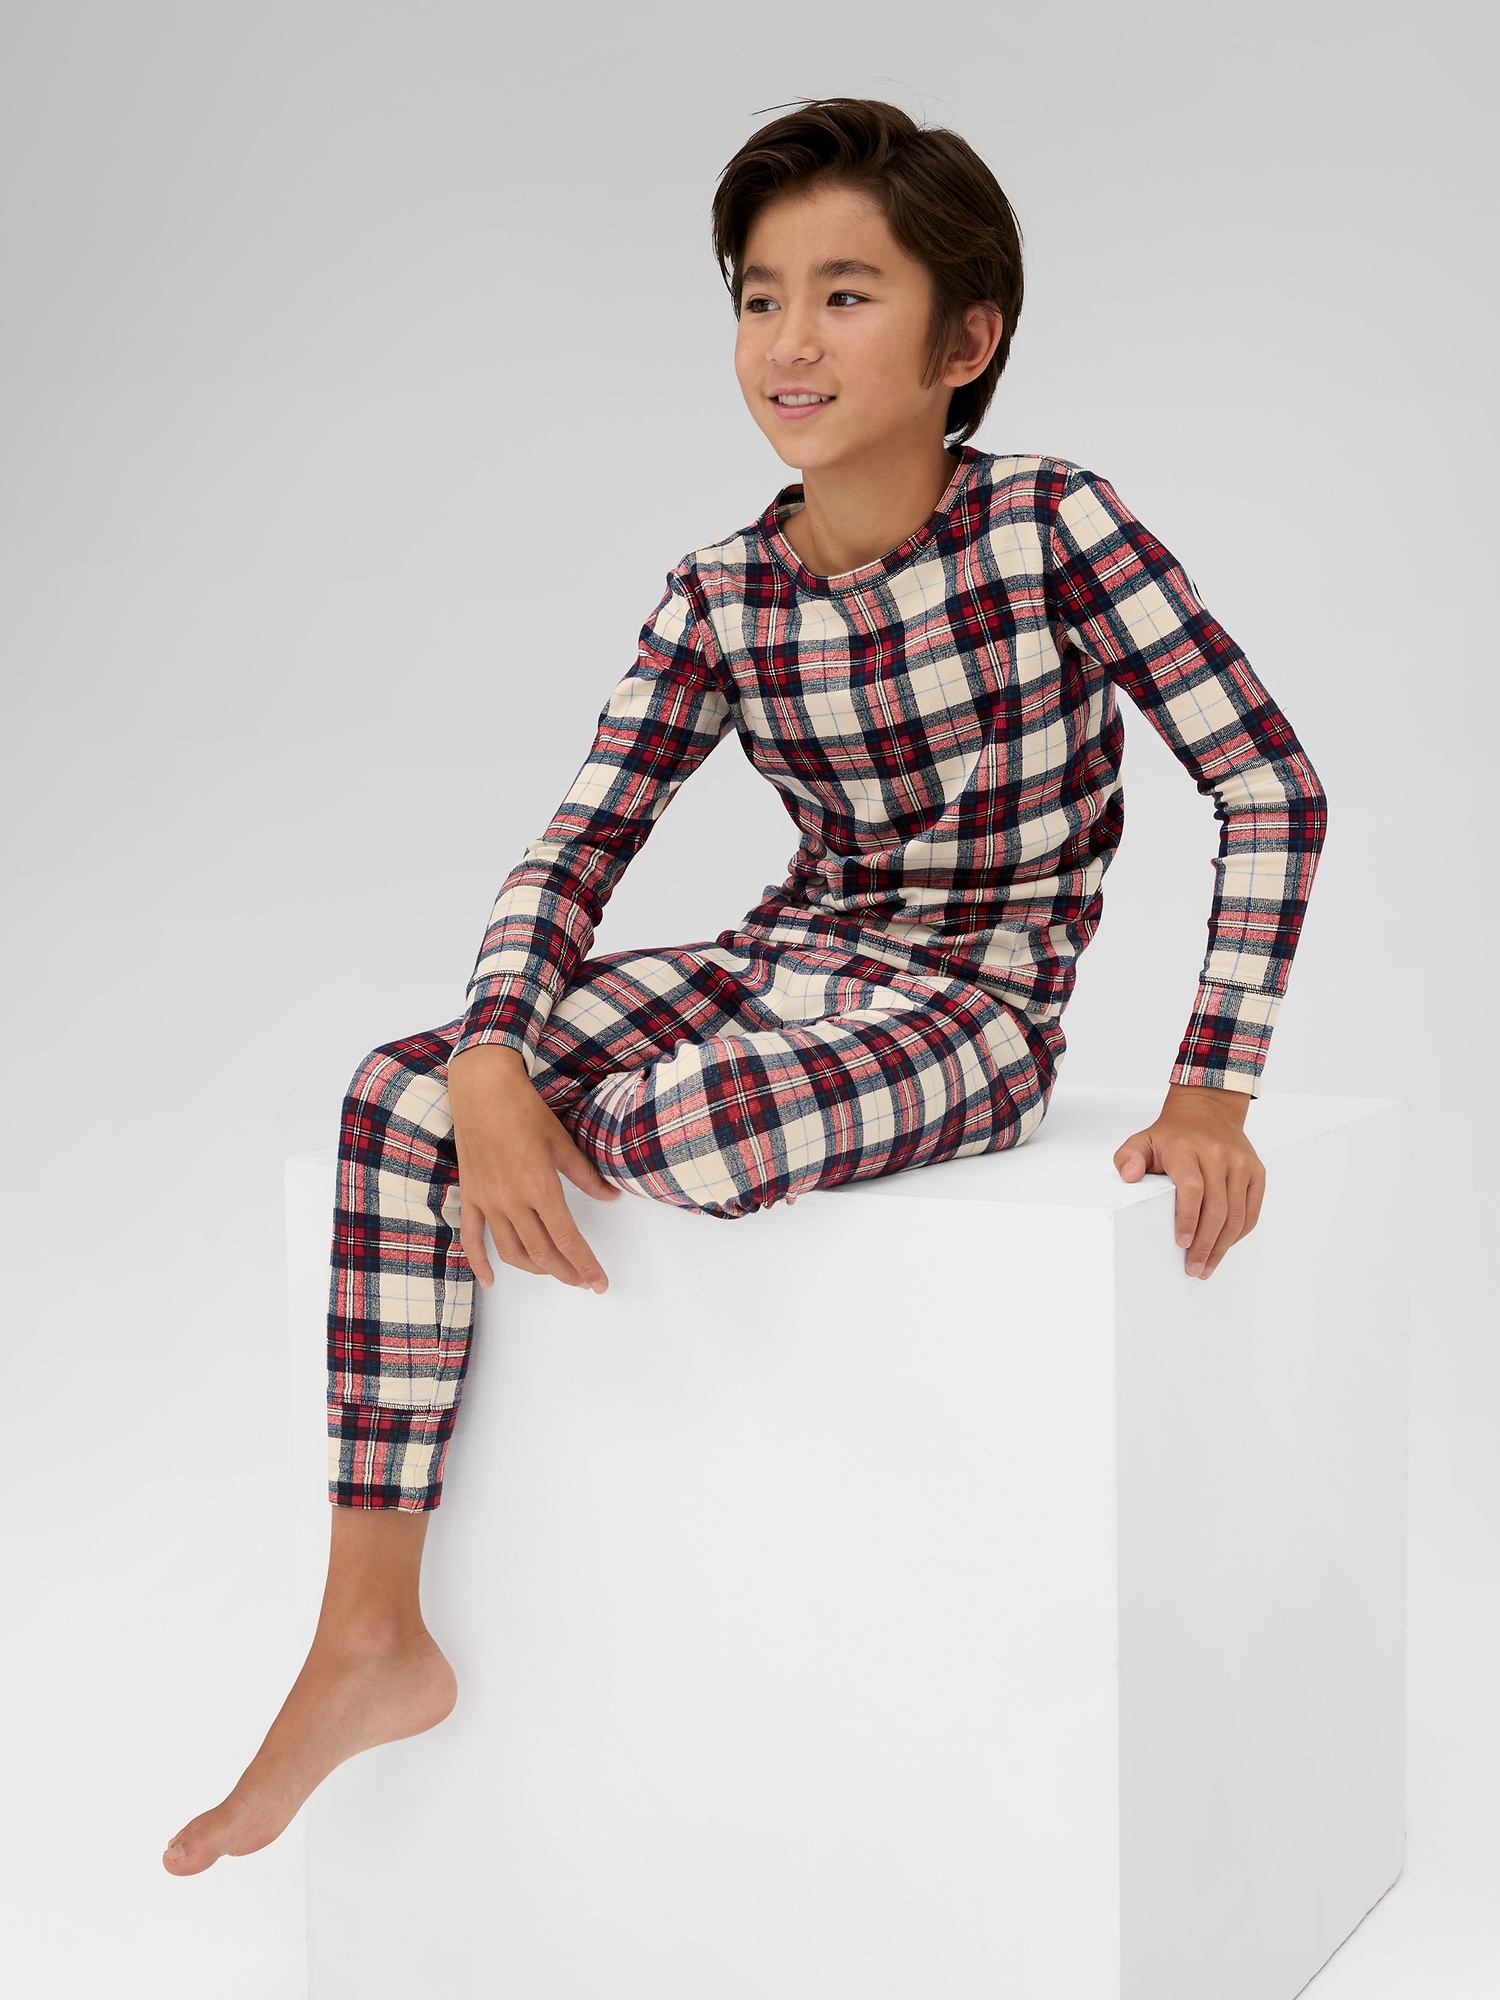 Introducing Our Brushed Organic Cotton Plaid PJ's 💕 Soft & breathable  these will be your new favourites for lounging